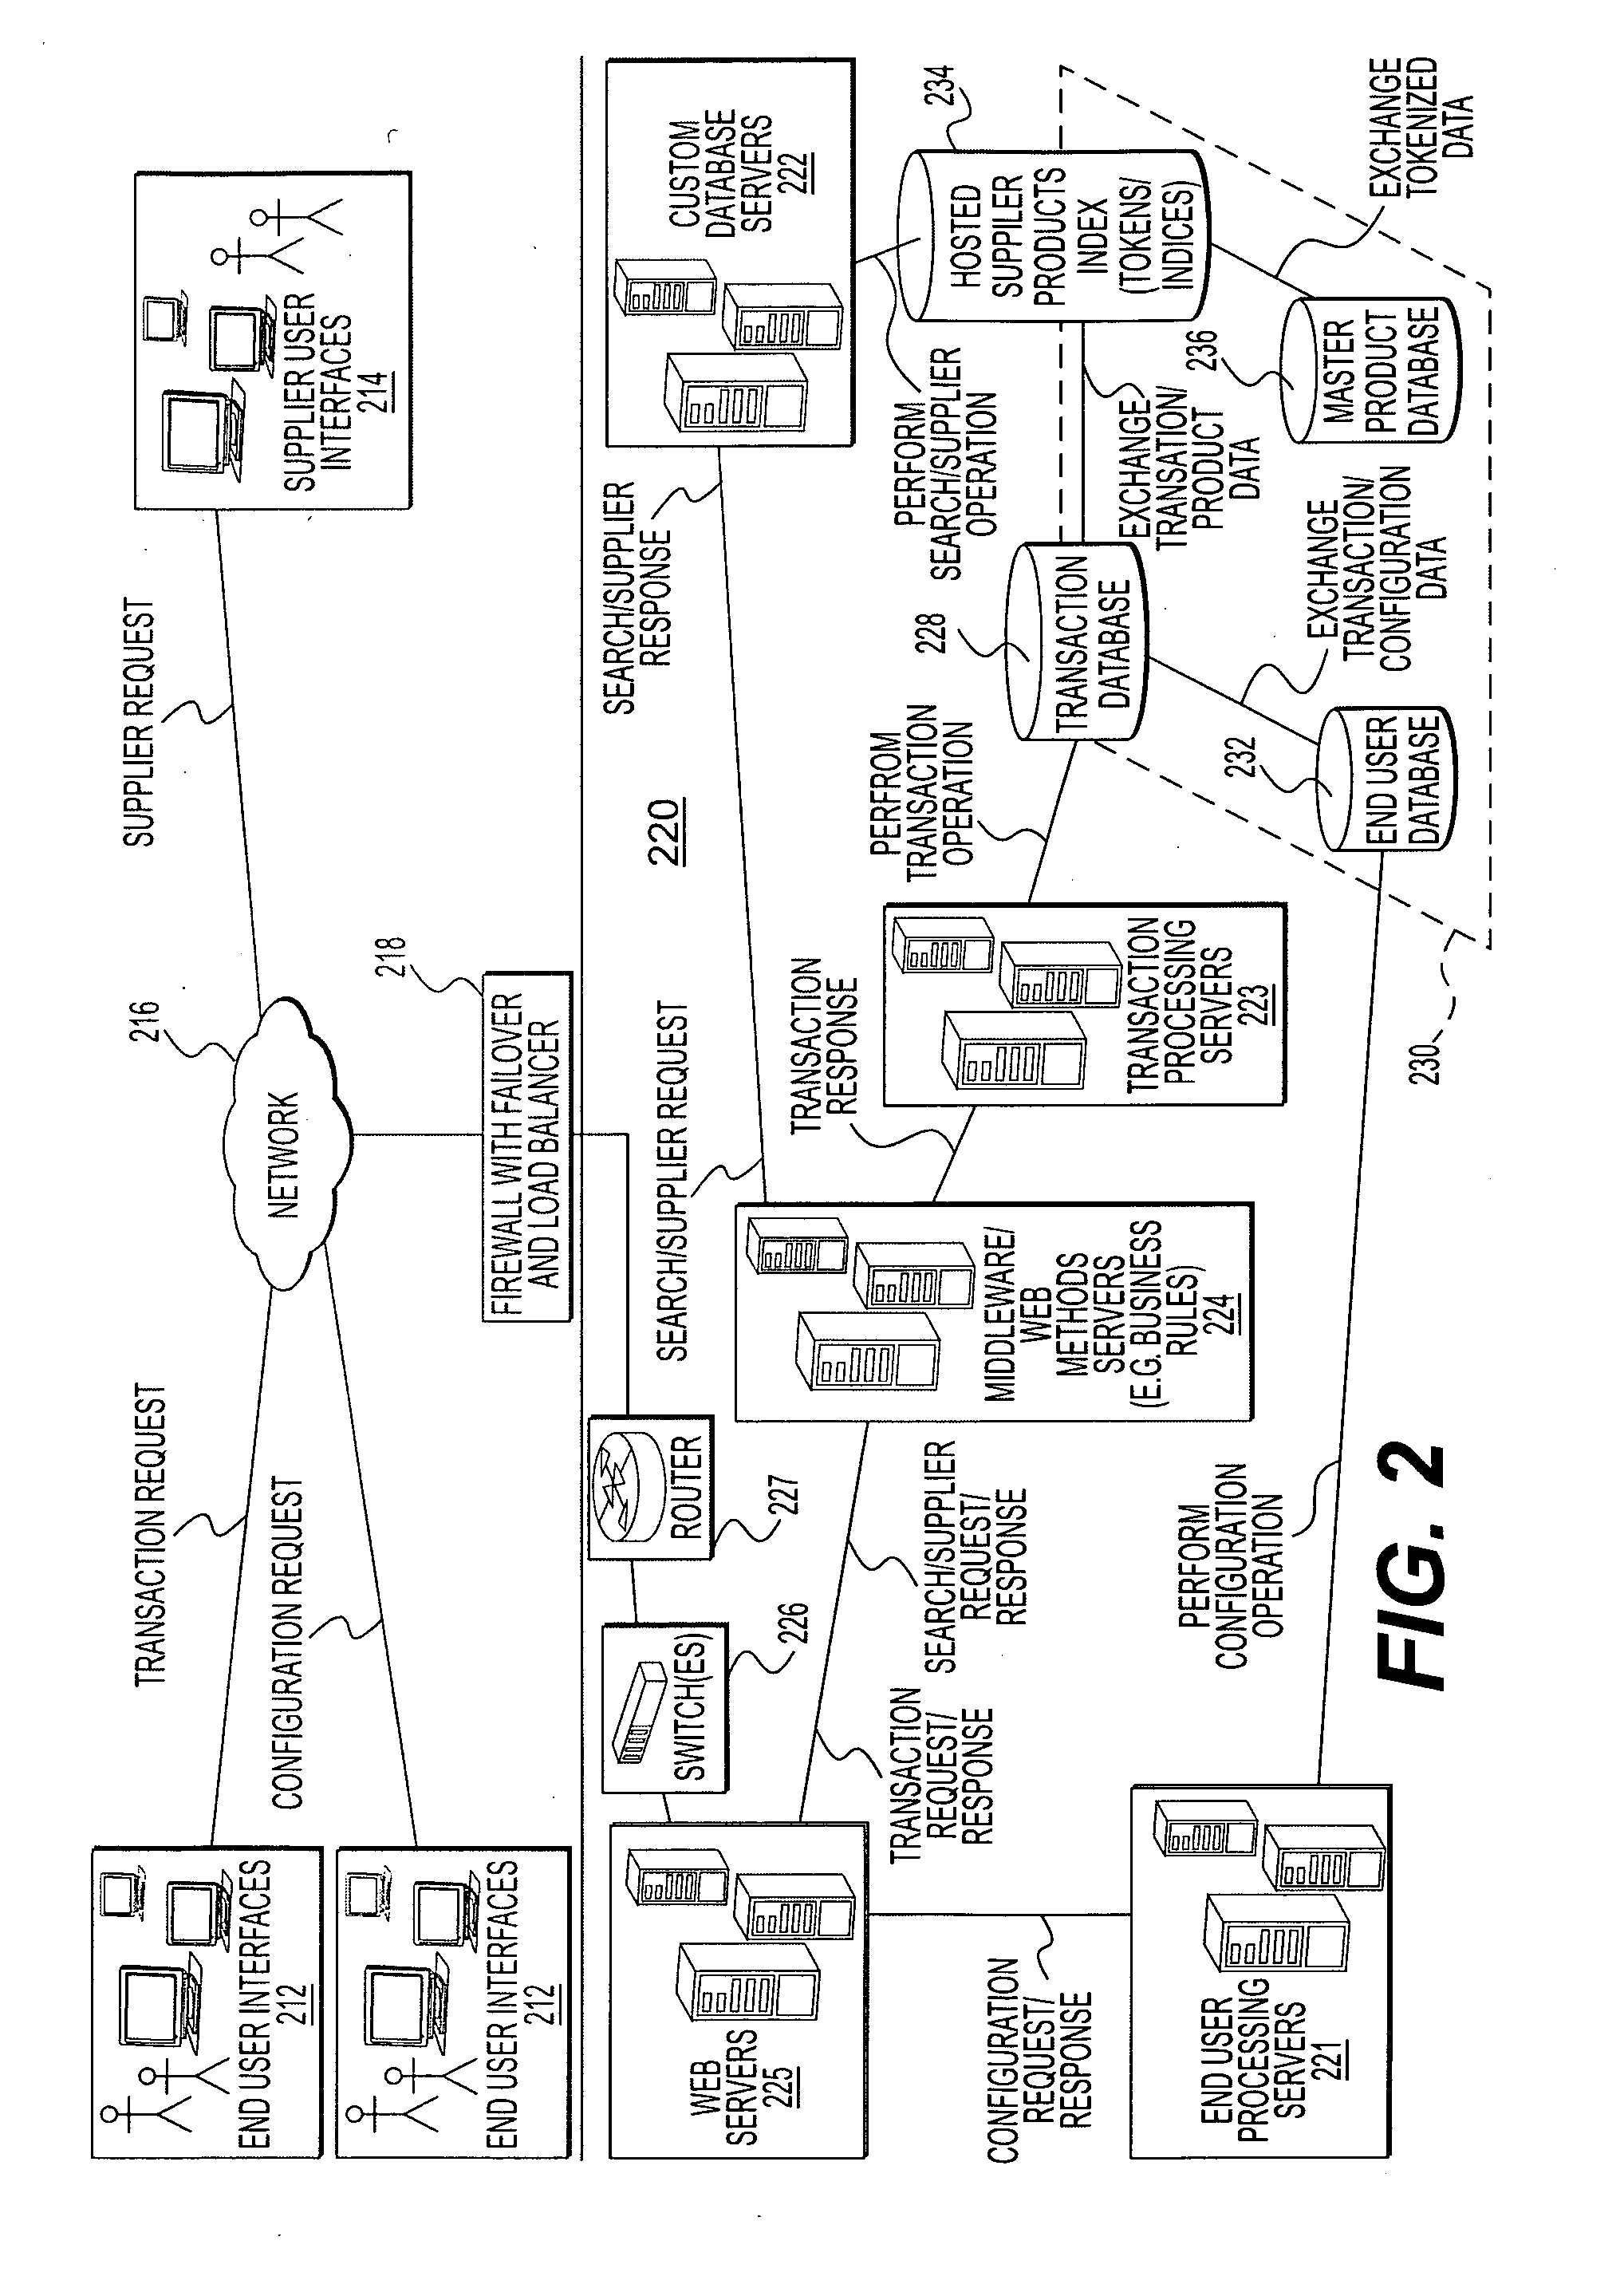 Procurement system and method over a network using a single instance multi-tenant architecture